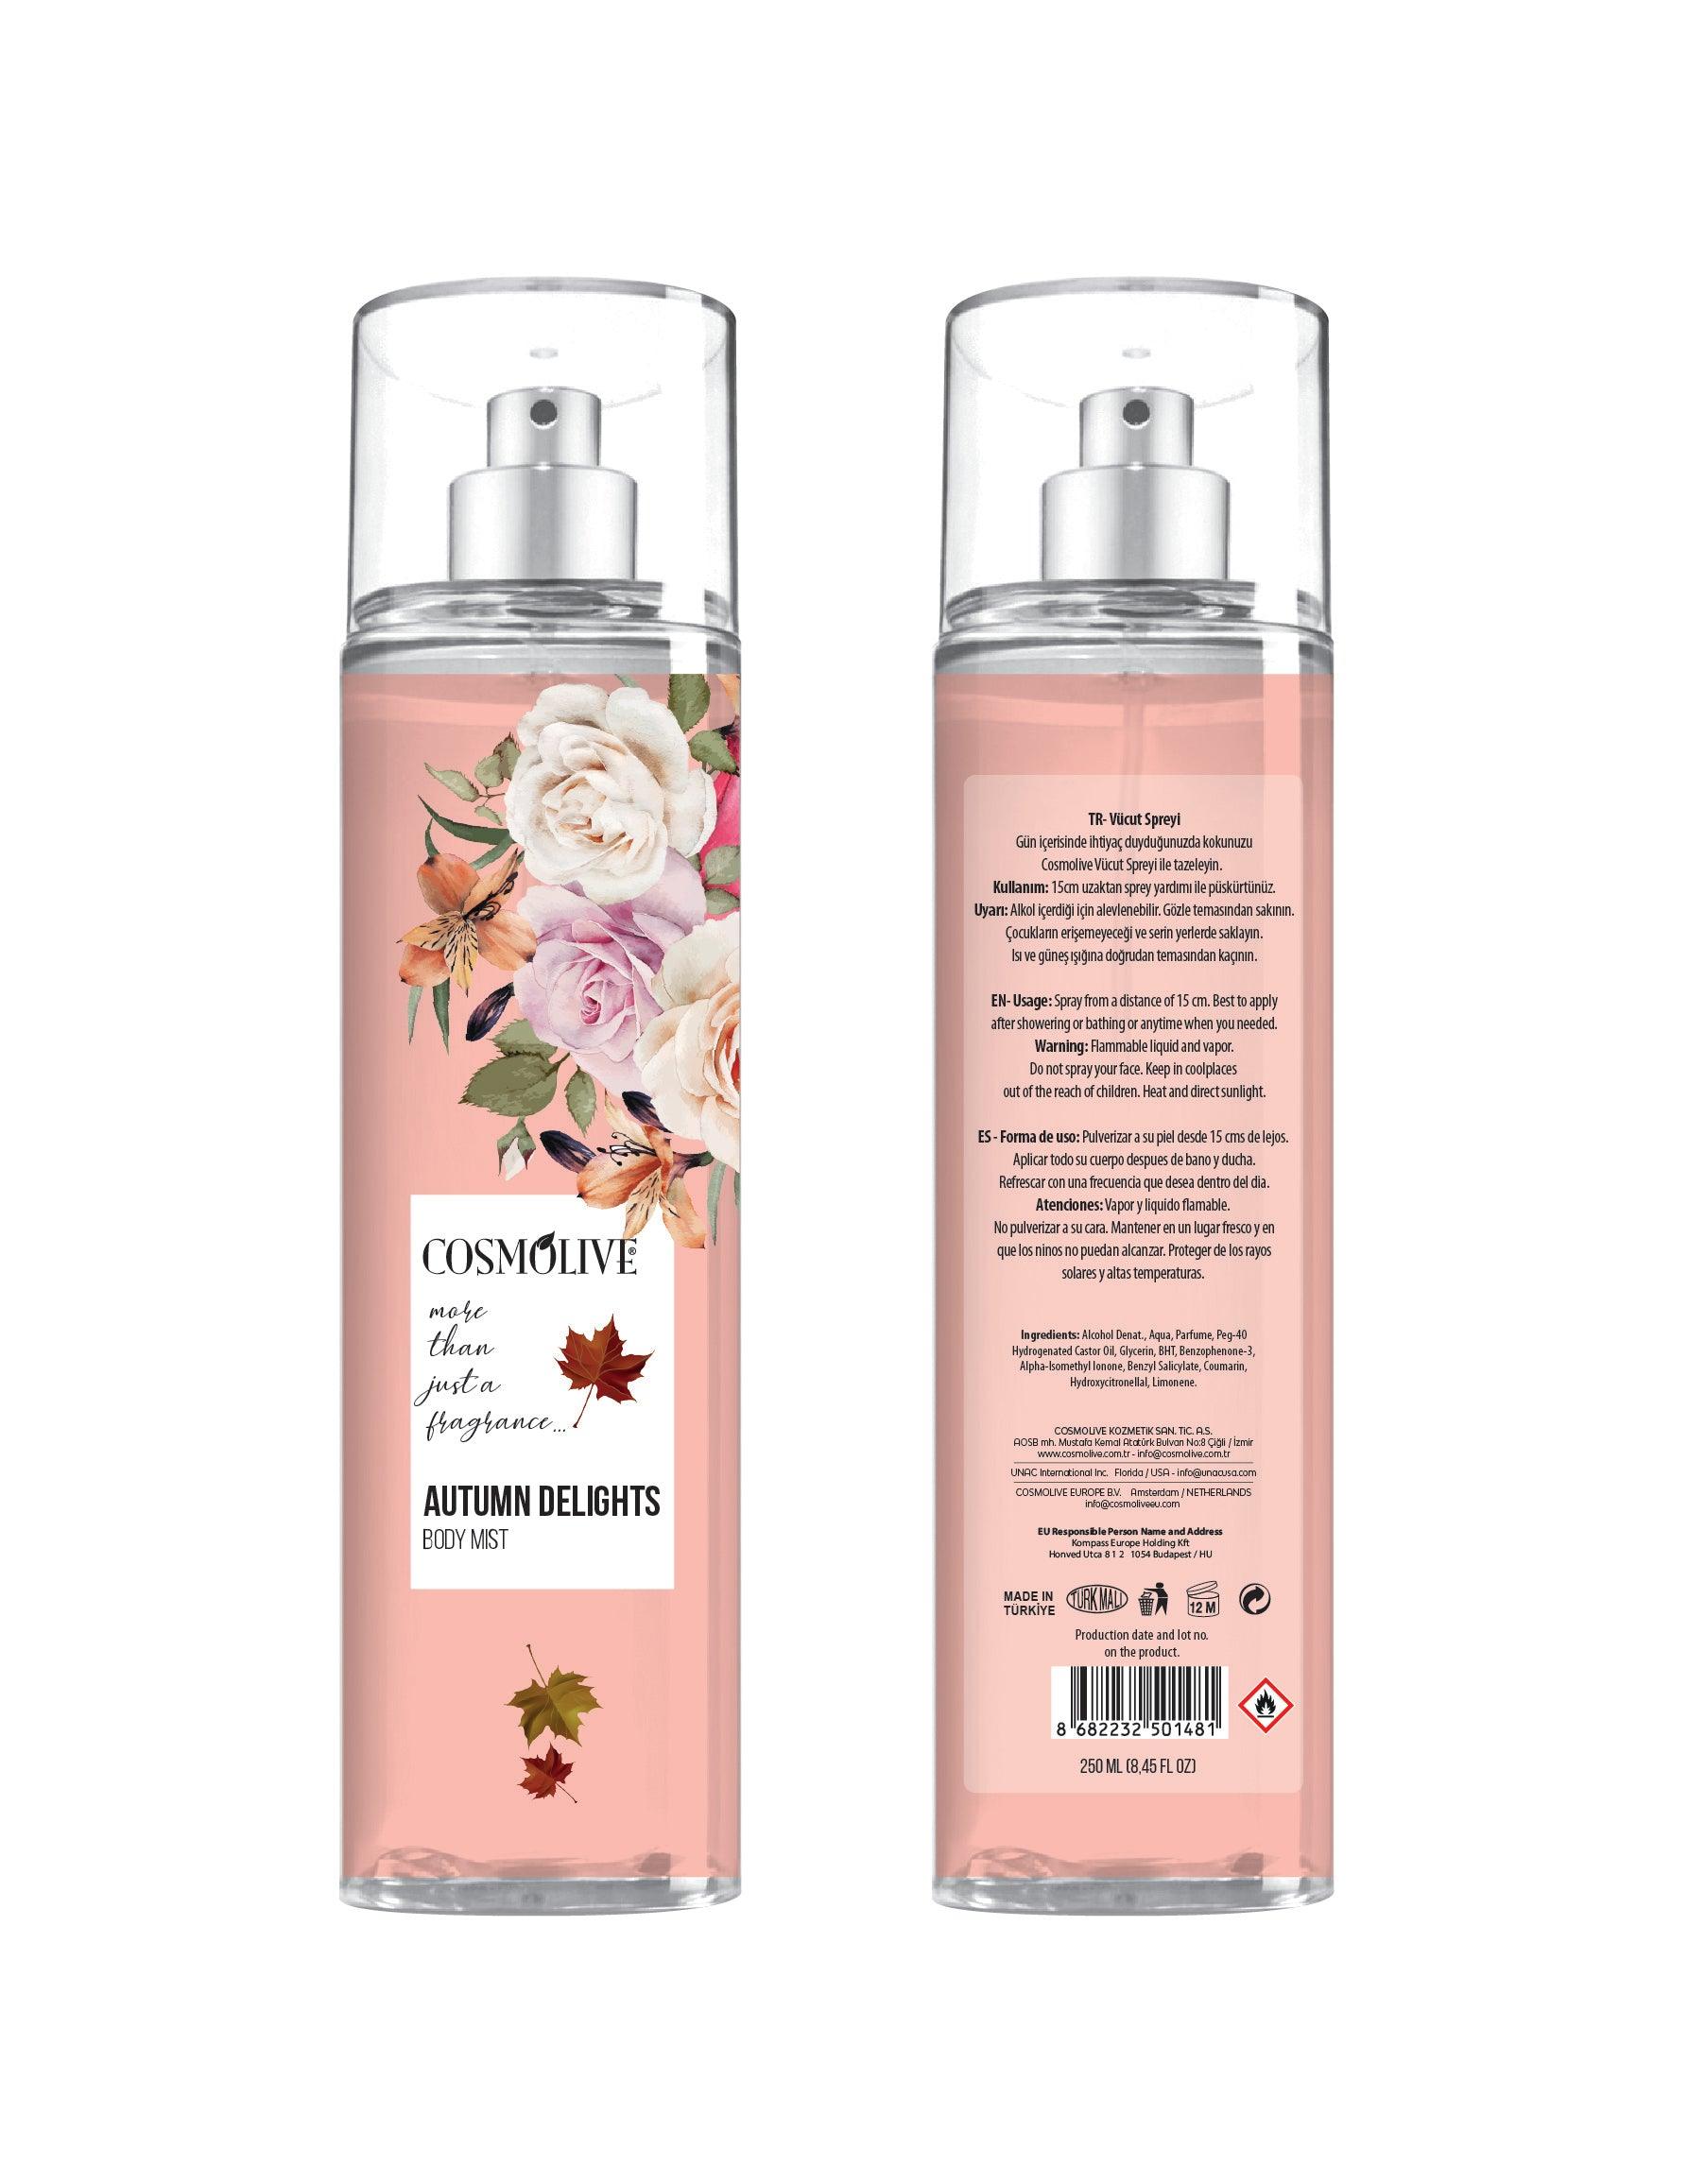 COSMOLIVE BODY MIST 250 ml Autumn Delights   / The Excellent Composition of Nature With The Fruit and Floral Essences / Natural Life - Natural Bazaar